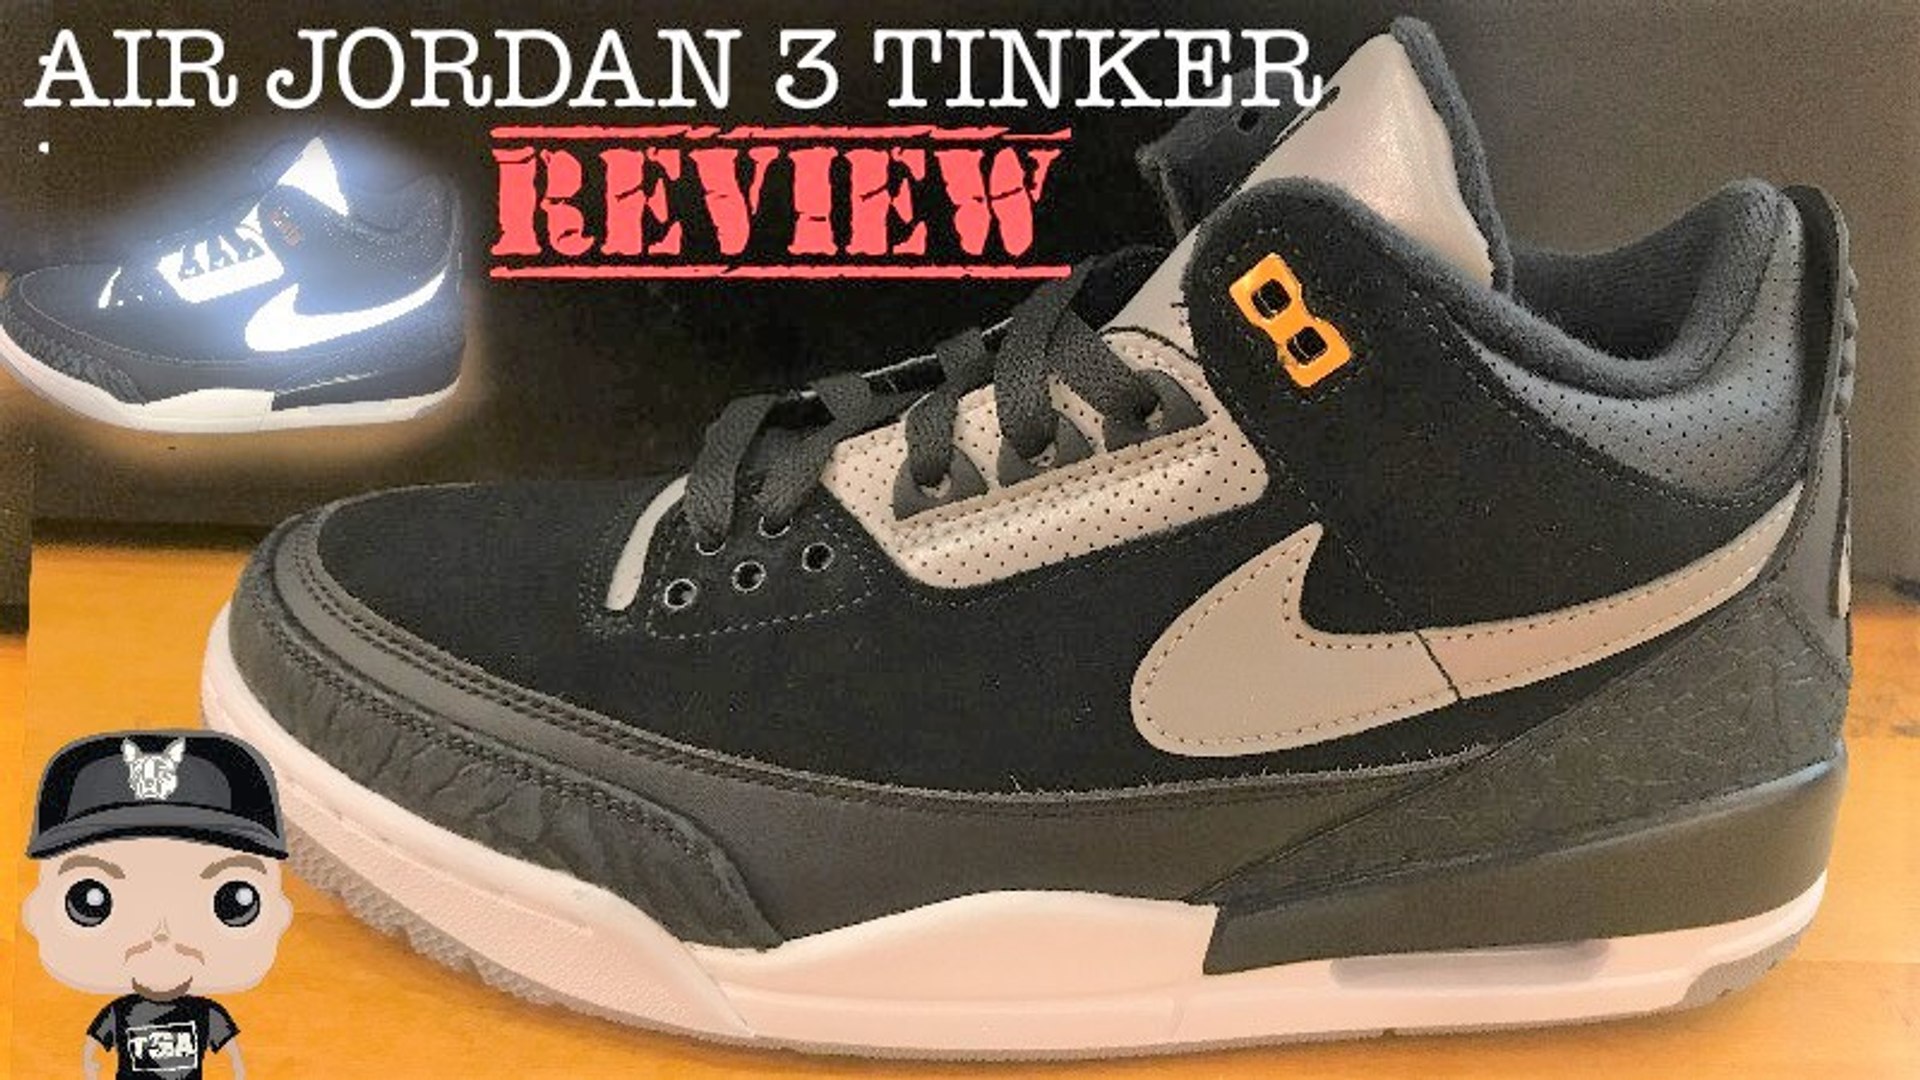 Air Jordan 3 Tinker Black Cement Retro Sneaker Detailed Look With Reflective  Actived Test - video Dailymotion